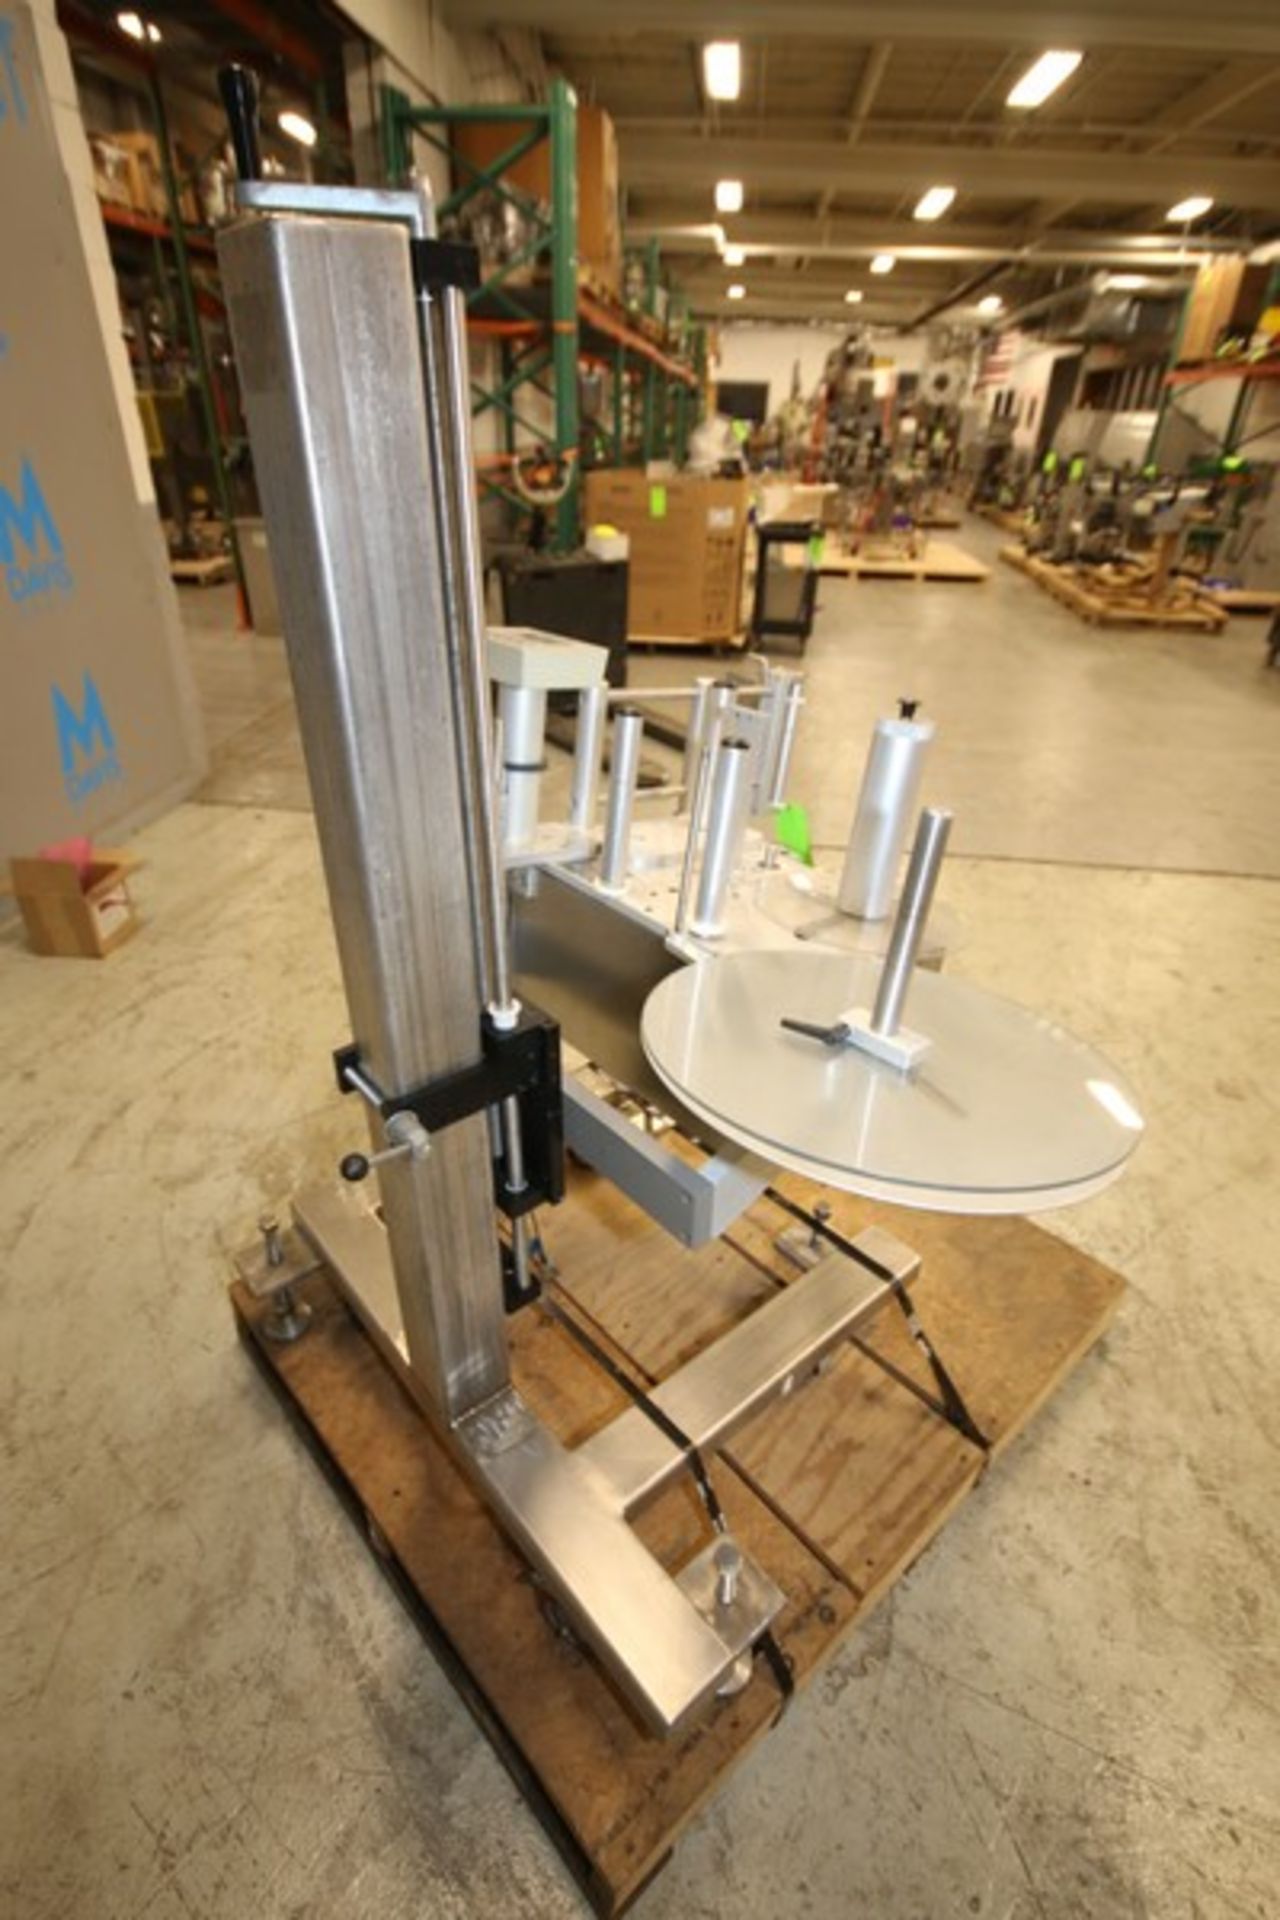 Label-Aire Portable Labeler, Model 3115NV 7"/16" RH 16" UNWD, SN 0335301111, 120V, Mounted on S/S - Image 6 of 8